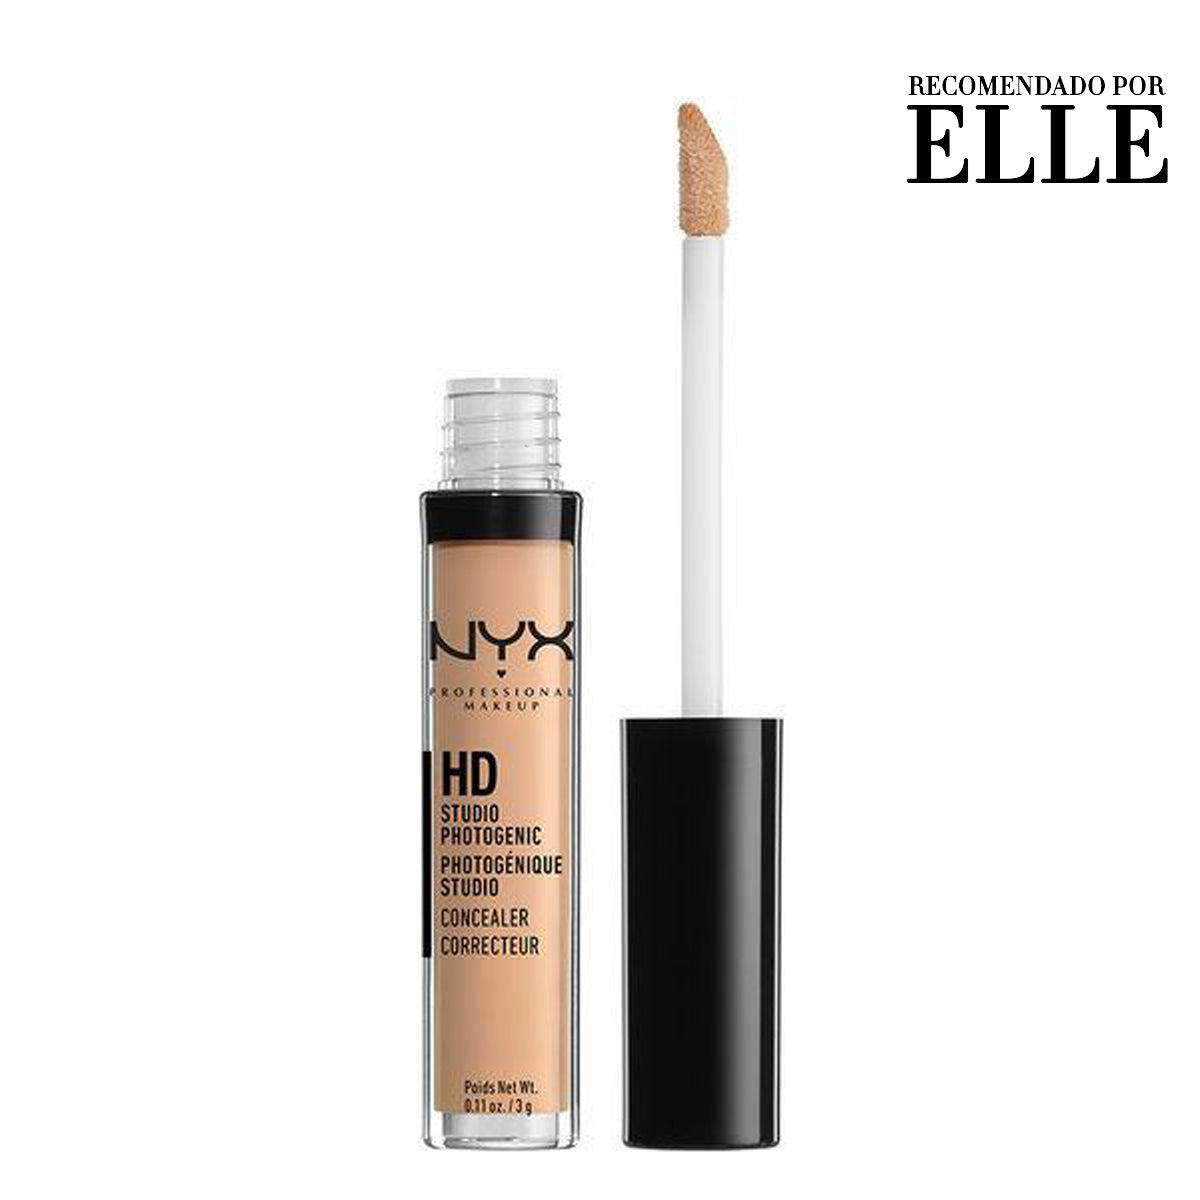 HD CONCEALER WAND GLOW - NYX PROFESSIONAL MAKEUP